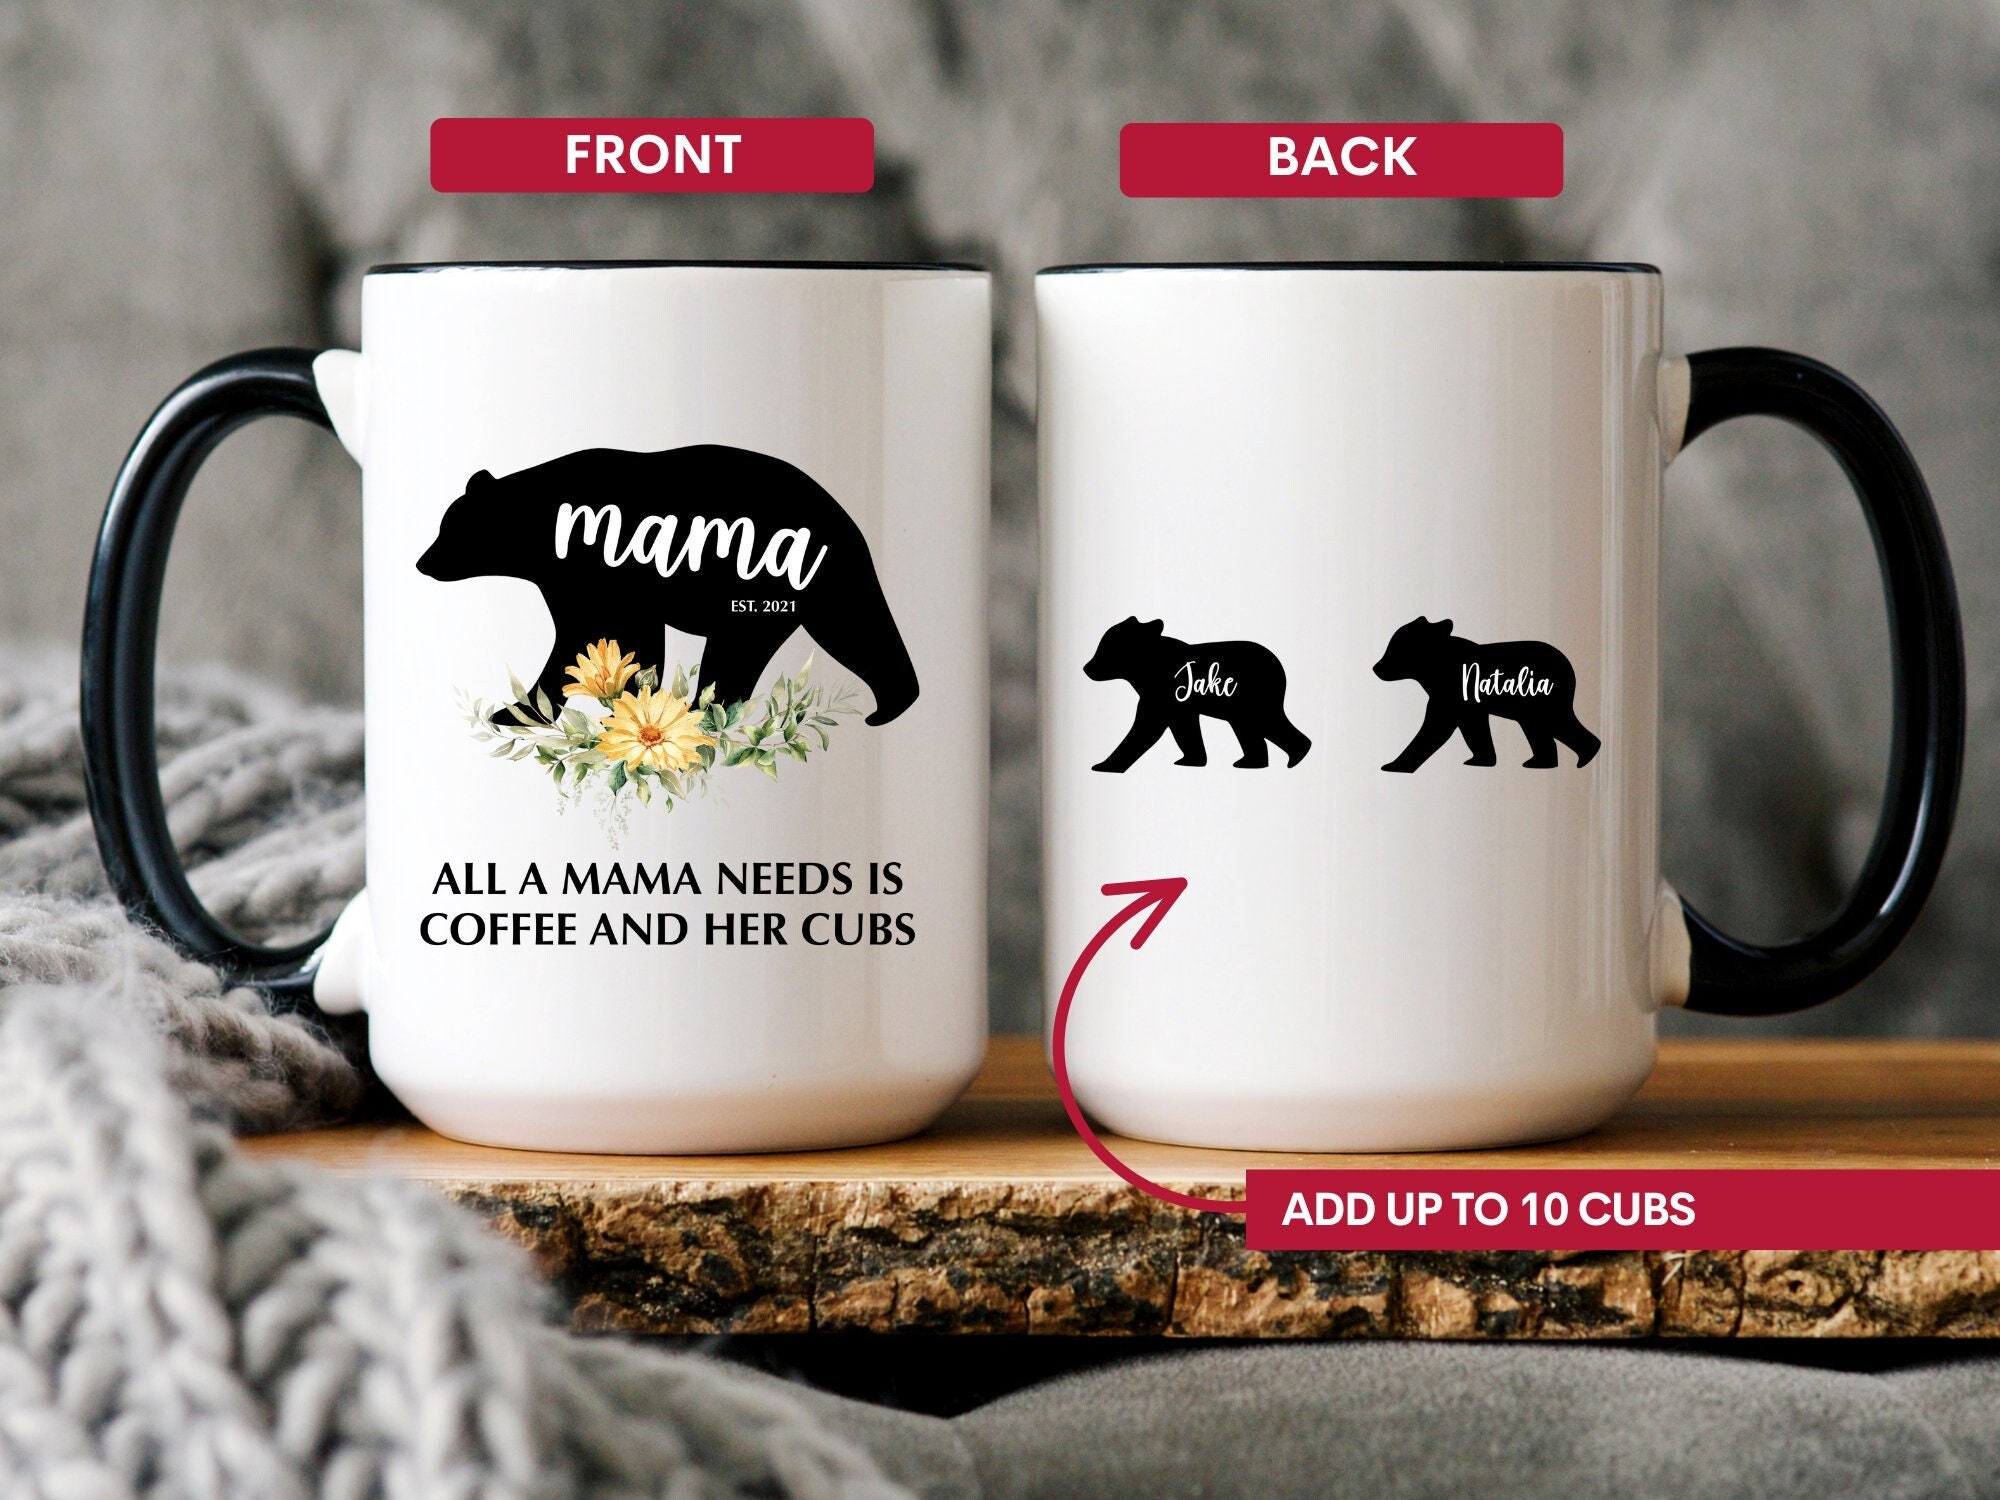 Mama Bear Coffee Mug for Mom, Mother, Wife - Cute Coffee Cups for Women -  Unique Fun Gifts for Her, Mother's Day, Christmas (Coral)